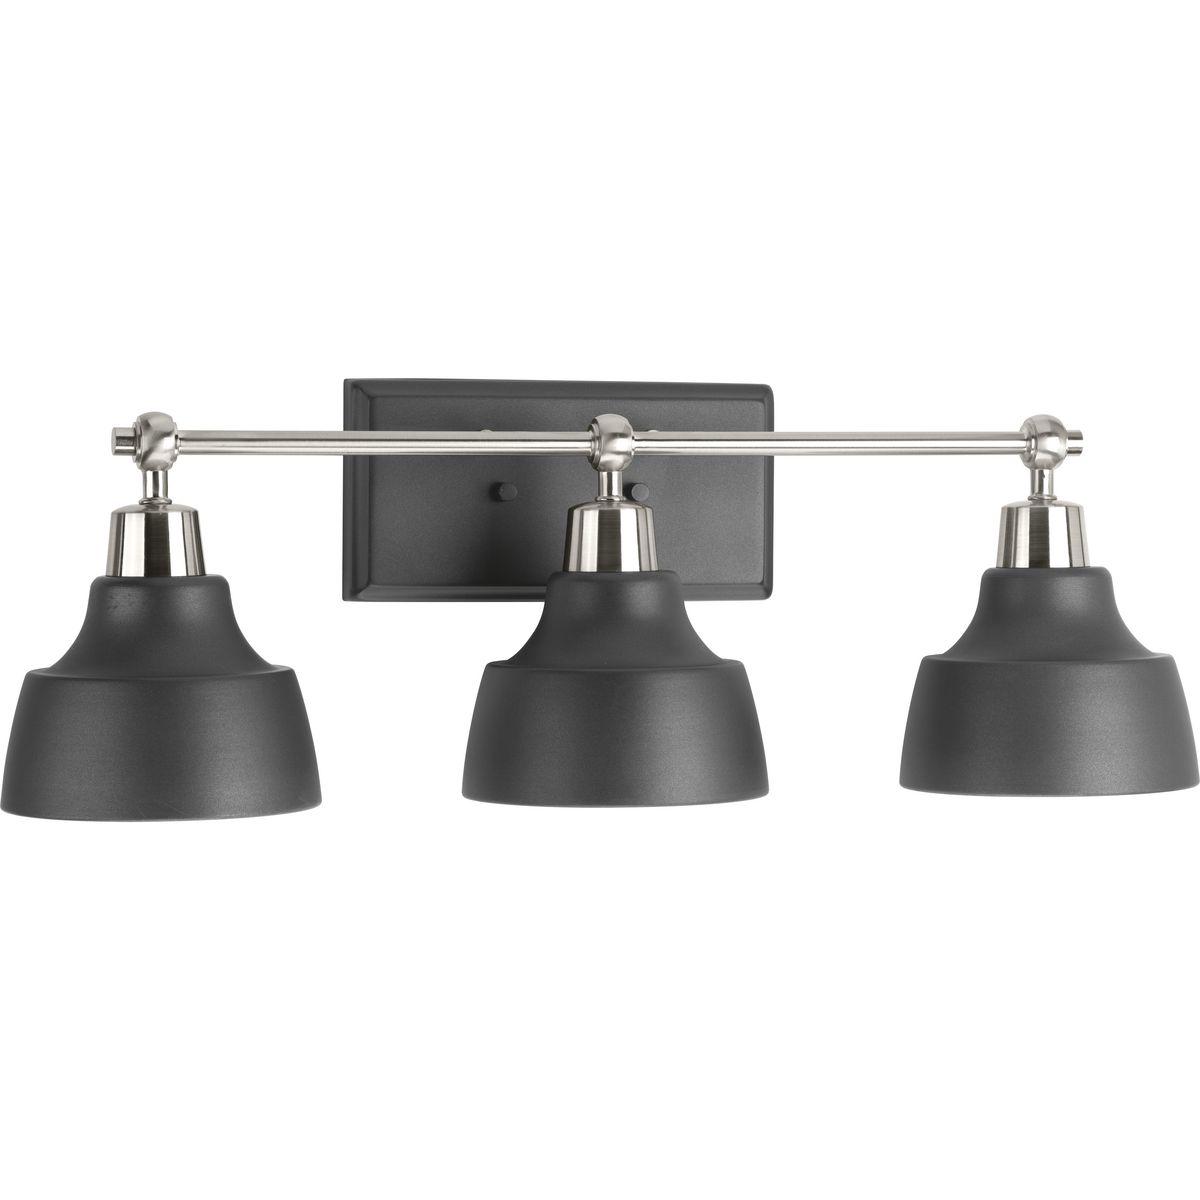 Hubbell P300041-009 Vintage and industrial styling coalesce in the functional, yet elegant frame of the Bramlett fixtures. Metal reflector style shades are complemented by contrasting metallic fittings. Fixtures from this collection pair well with either vintage style or tra